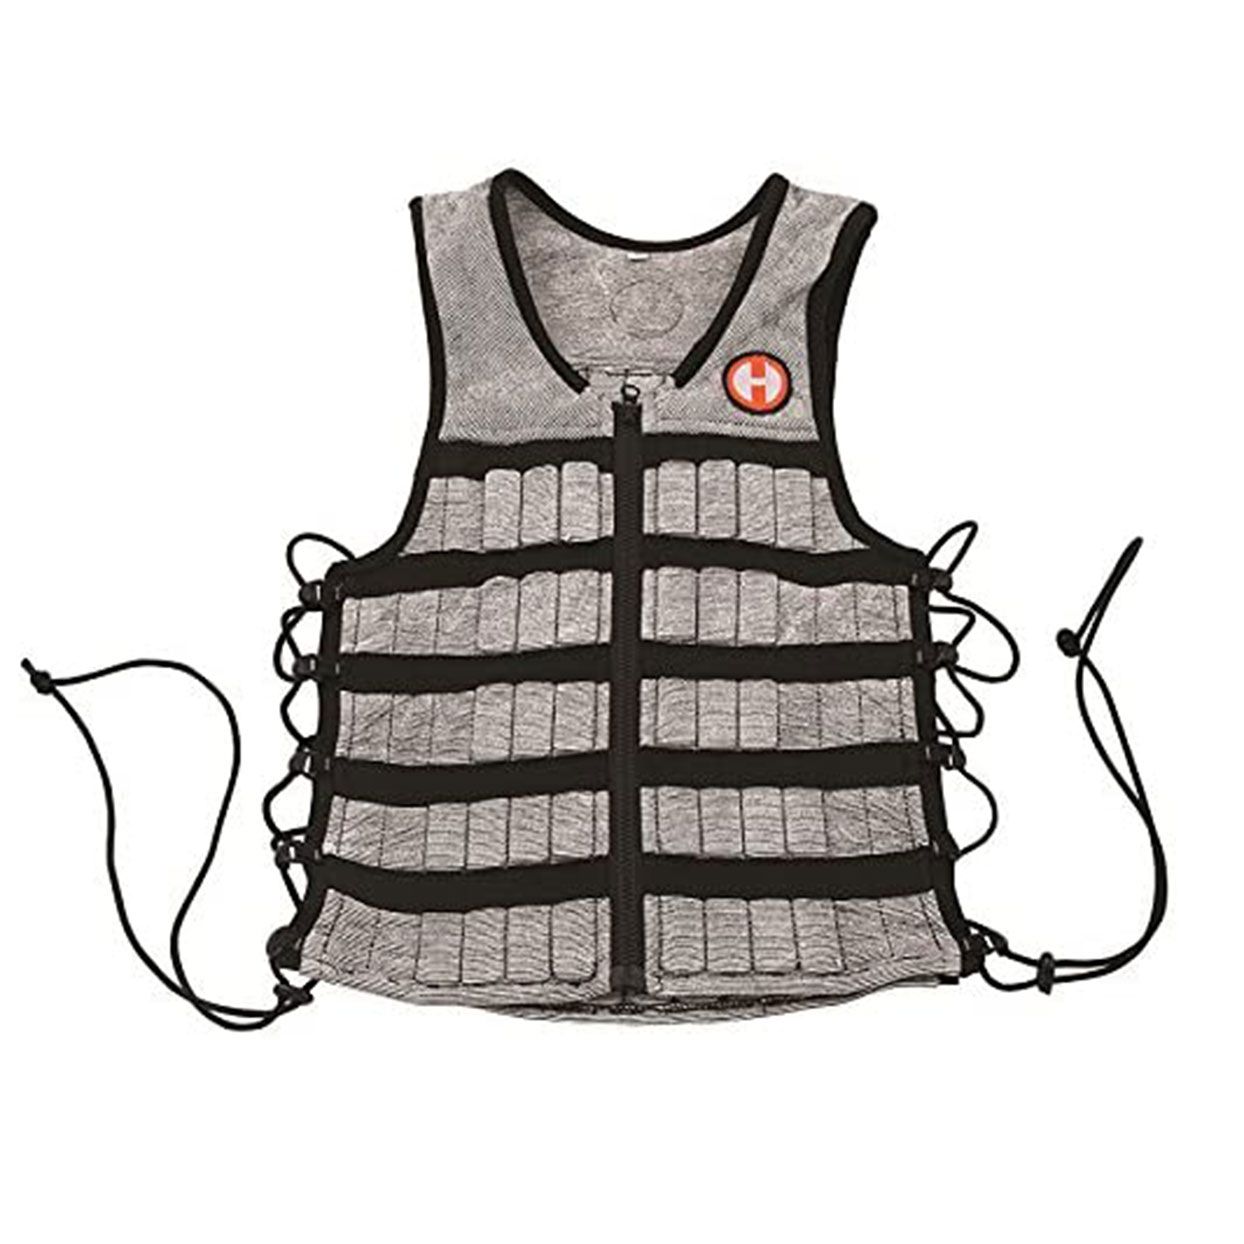 hyper-wear-weighted-vest-for-workouts